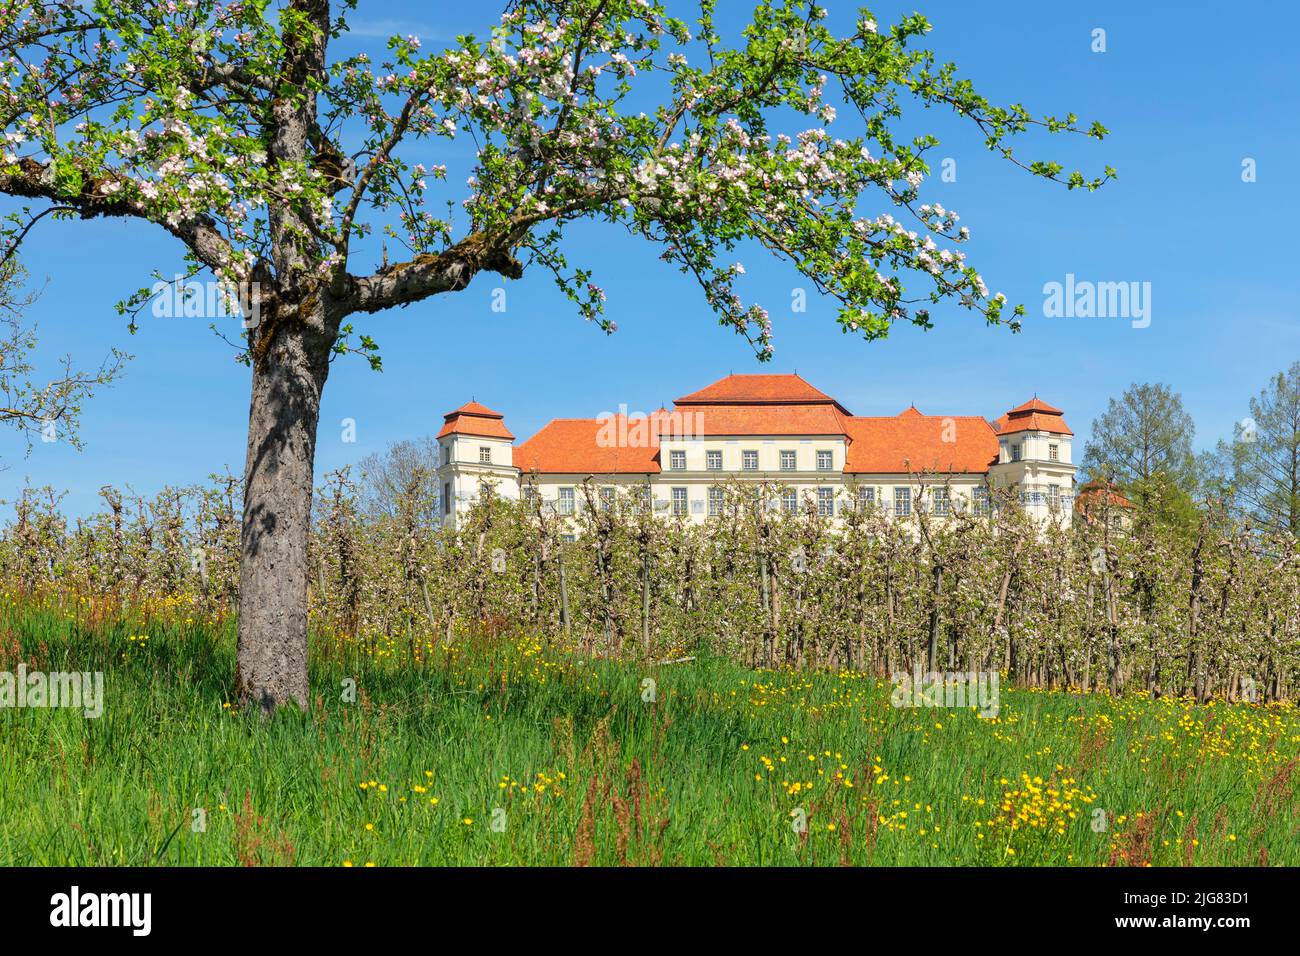 Fruit tree blossom at the New Castle, Tettnang, Lake Constance, Upper Swabia, Baden-Württemberg, Germany Stock Photo